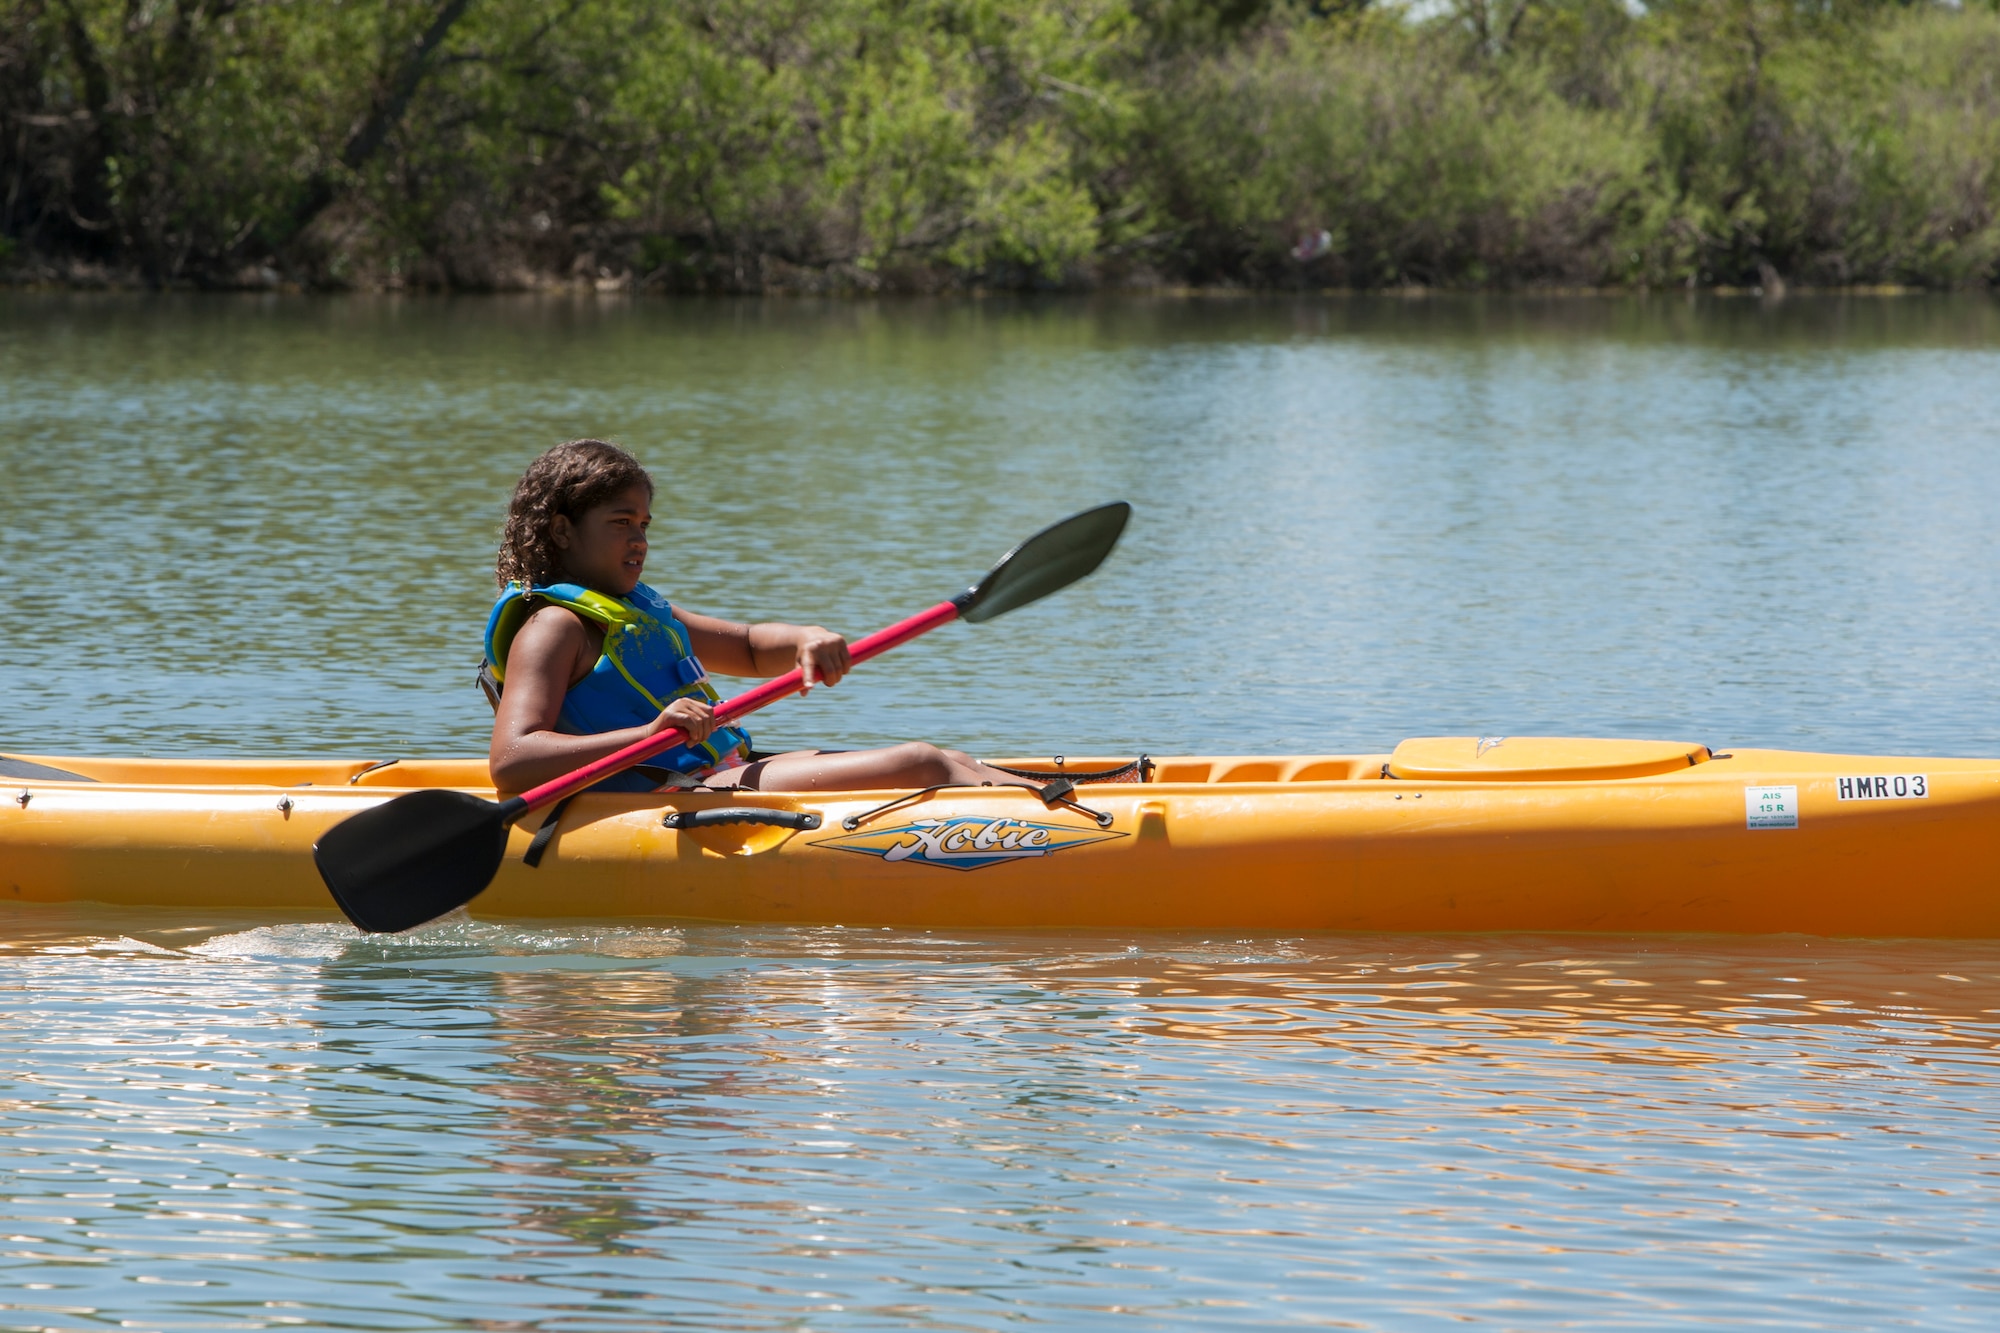 Olivia Marshall, 9, daughter of Capt. Lauren Rodgers, 90th Medical Support Squadron, practices her kayak skills on the base lake, F.E. Warren Air Force Base, Wyo., June 9, 2015. Olivia participated in Outdoor Recreation's  Basic Recreation Adventure Training Camp which included various outdoor activities on base and in the local area. (U.S. Air Force photo by Lan Kim)